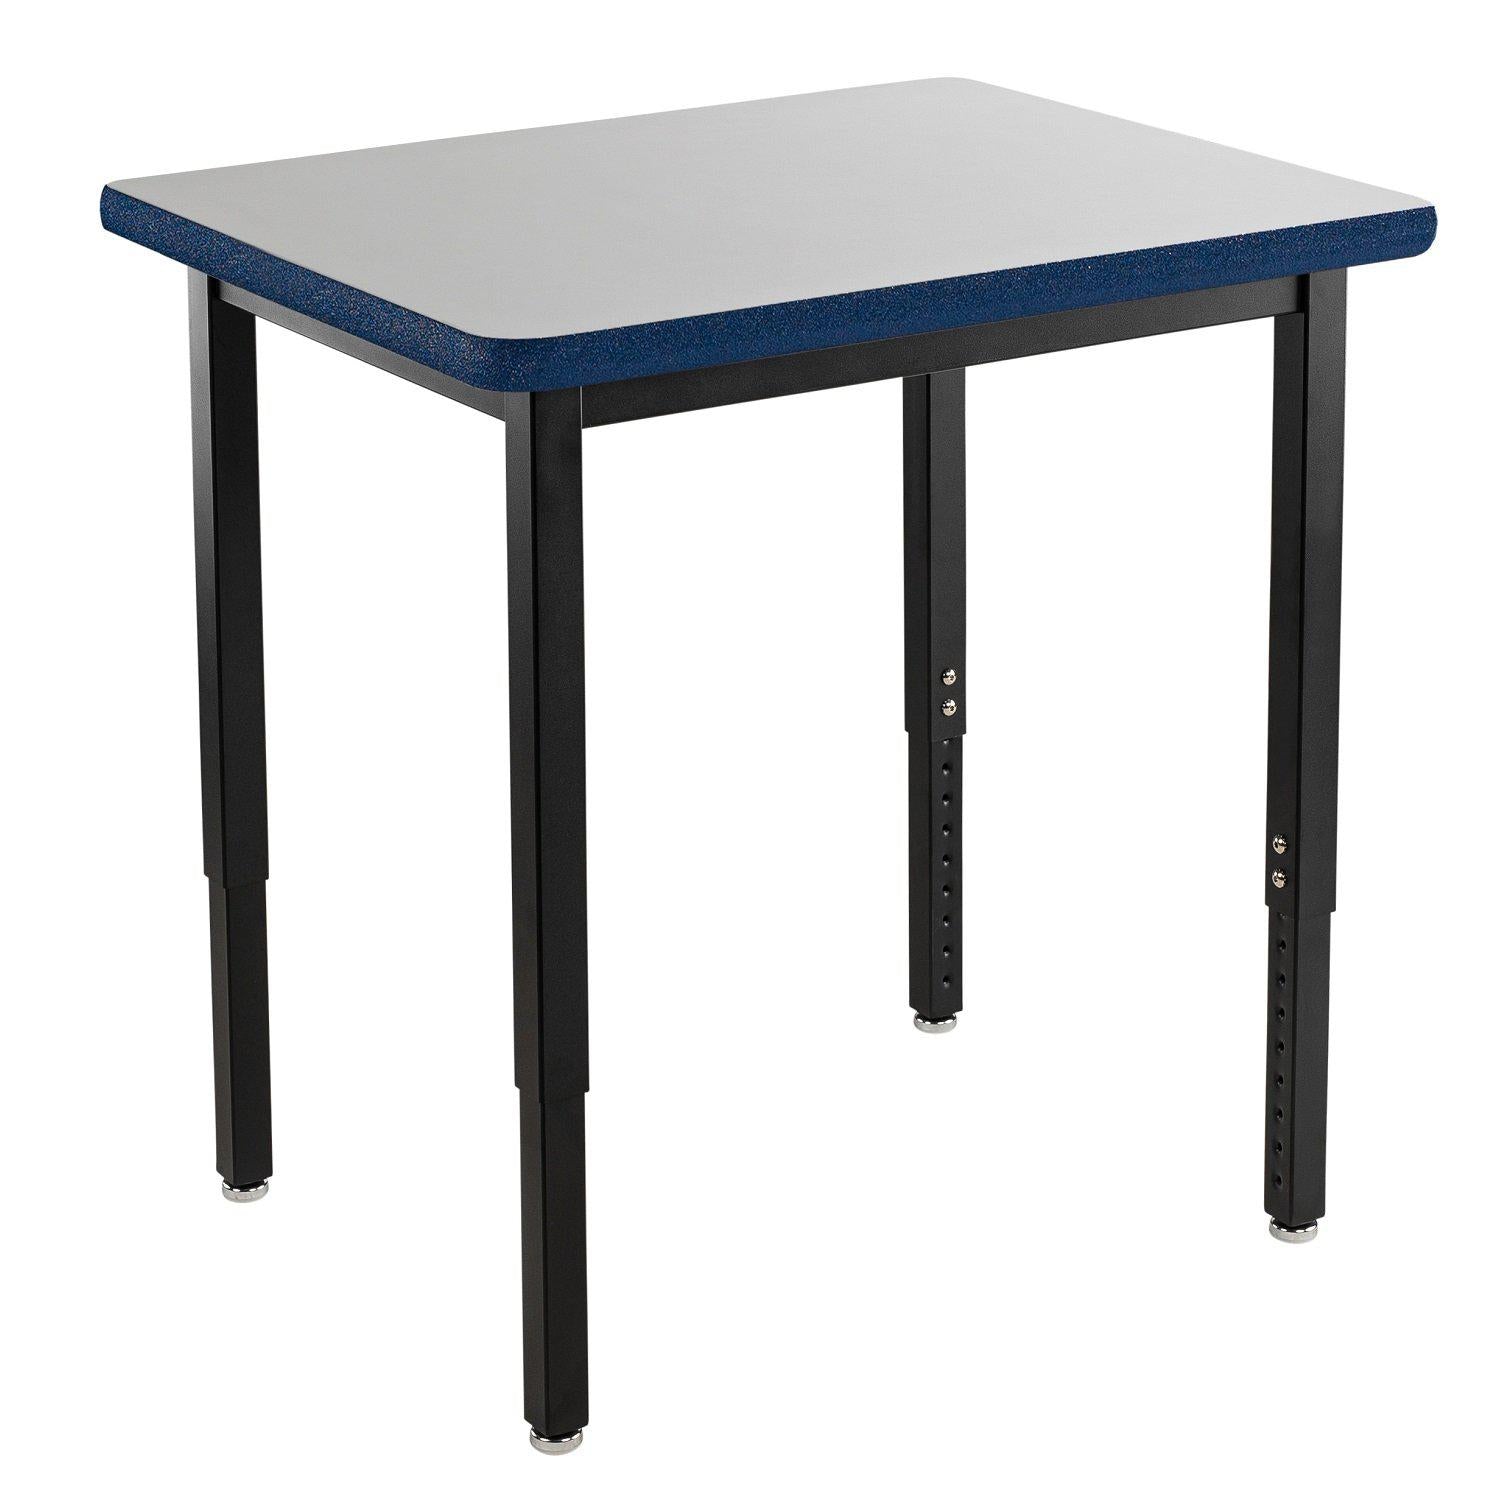 Heavy-Duty Height-Adjustable Utility Table, Black Frame, 30" x 36", Supreme High-Pressure Laminate Top with Black ProtectEdge